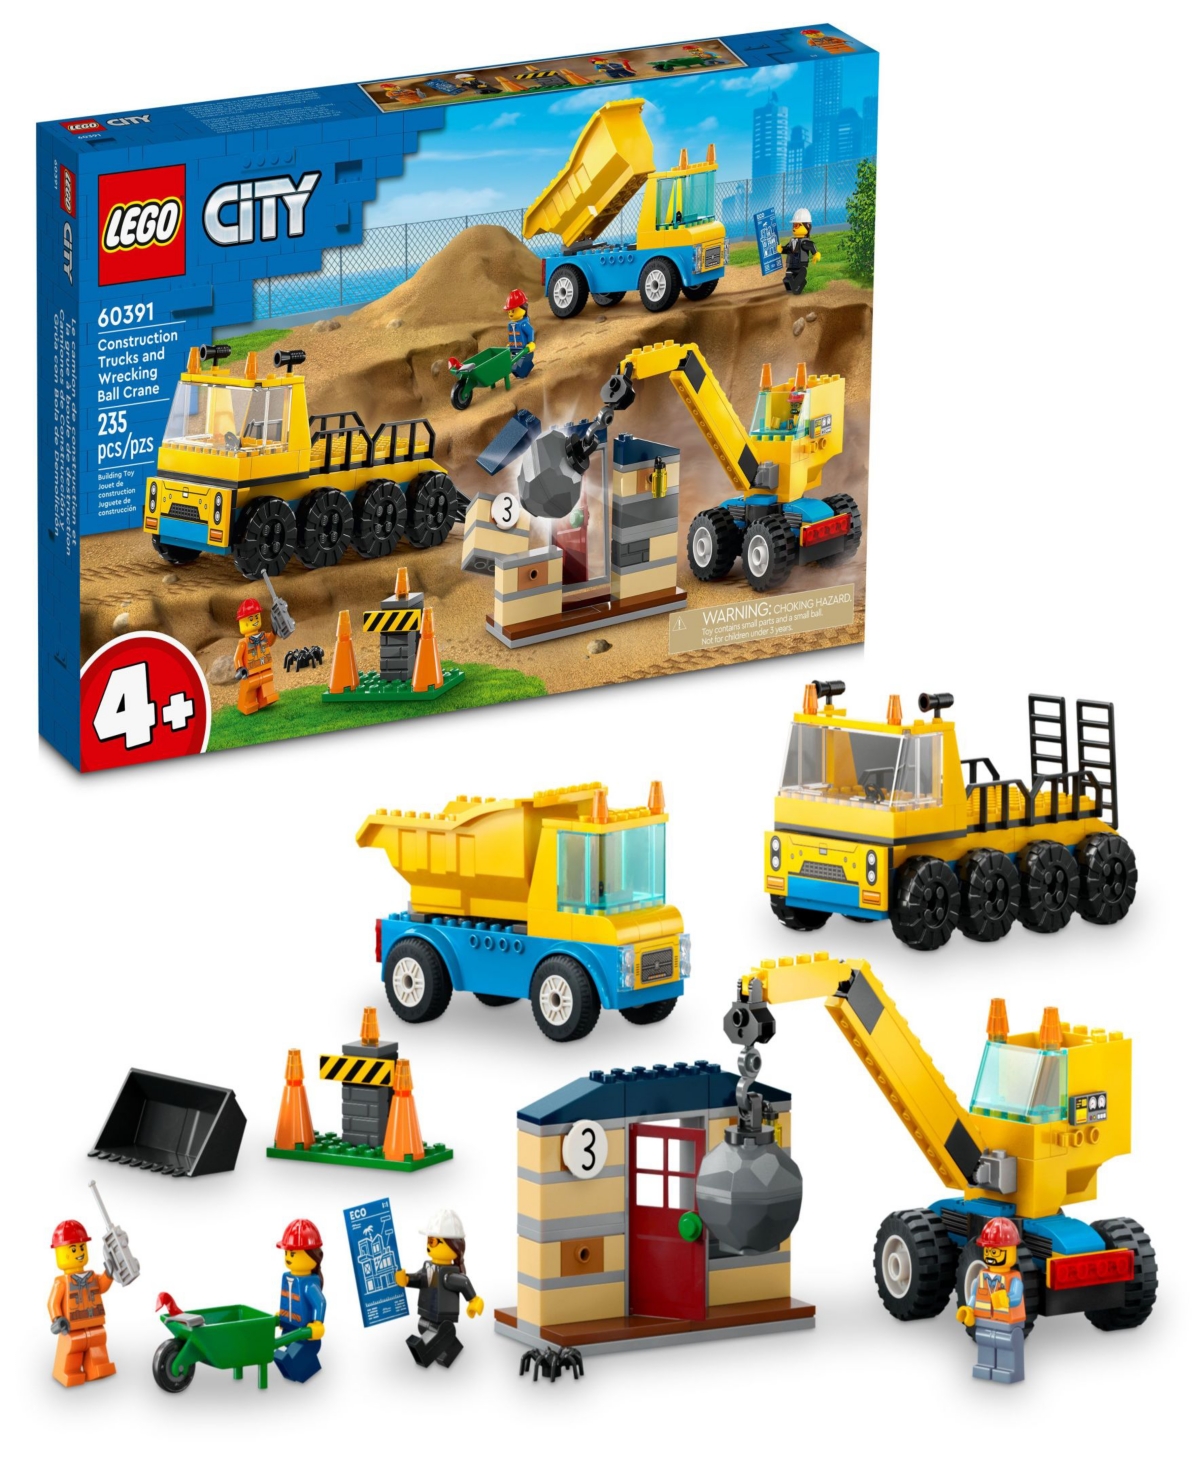 Lego City Construction Trucks And Wrecking Ball Crane Toddler Building Toy Set 60391 In Multicolor